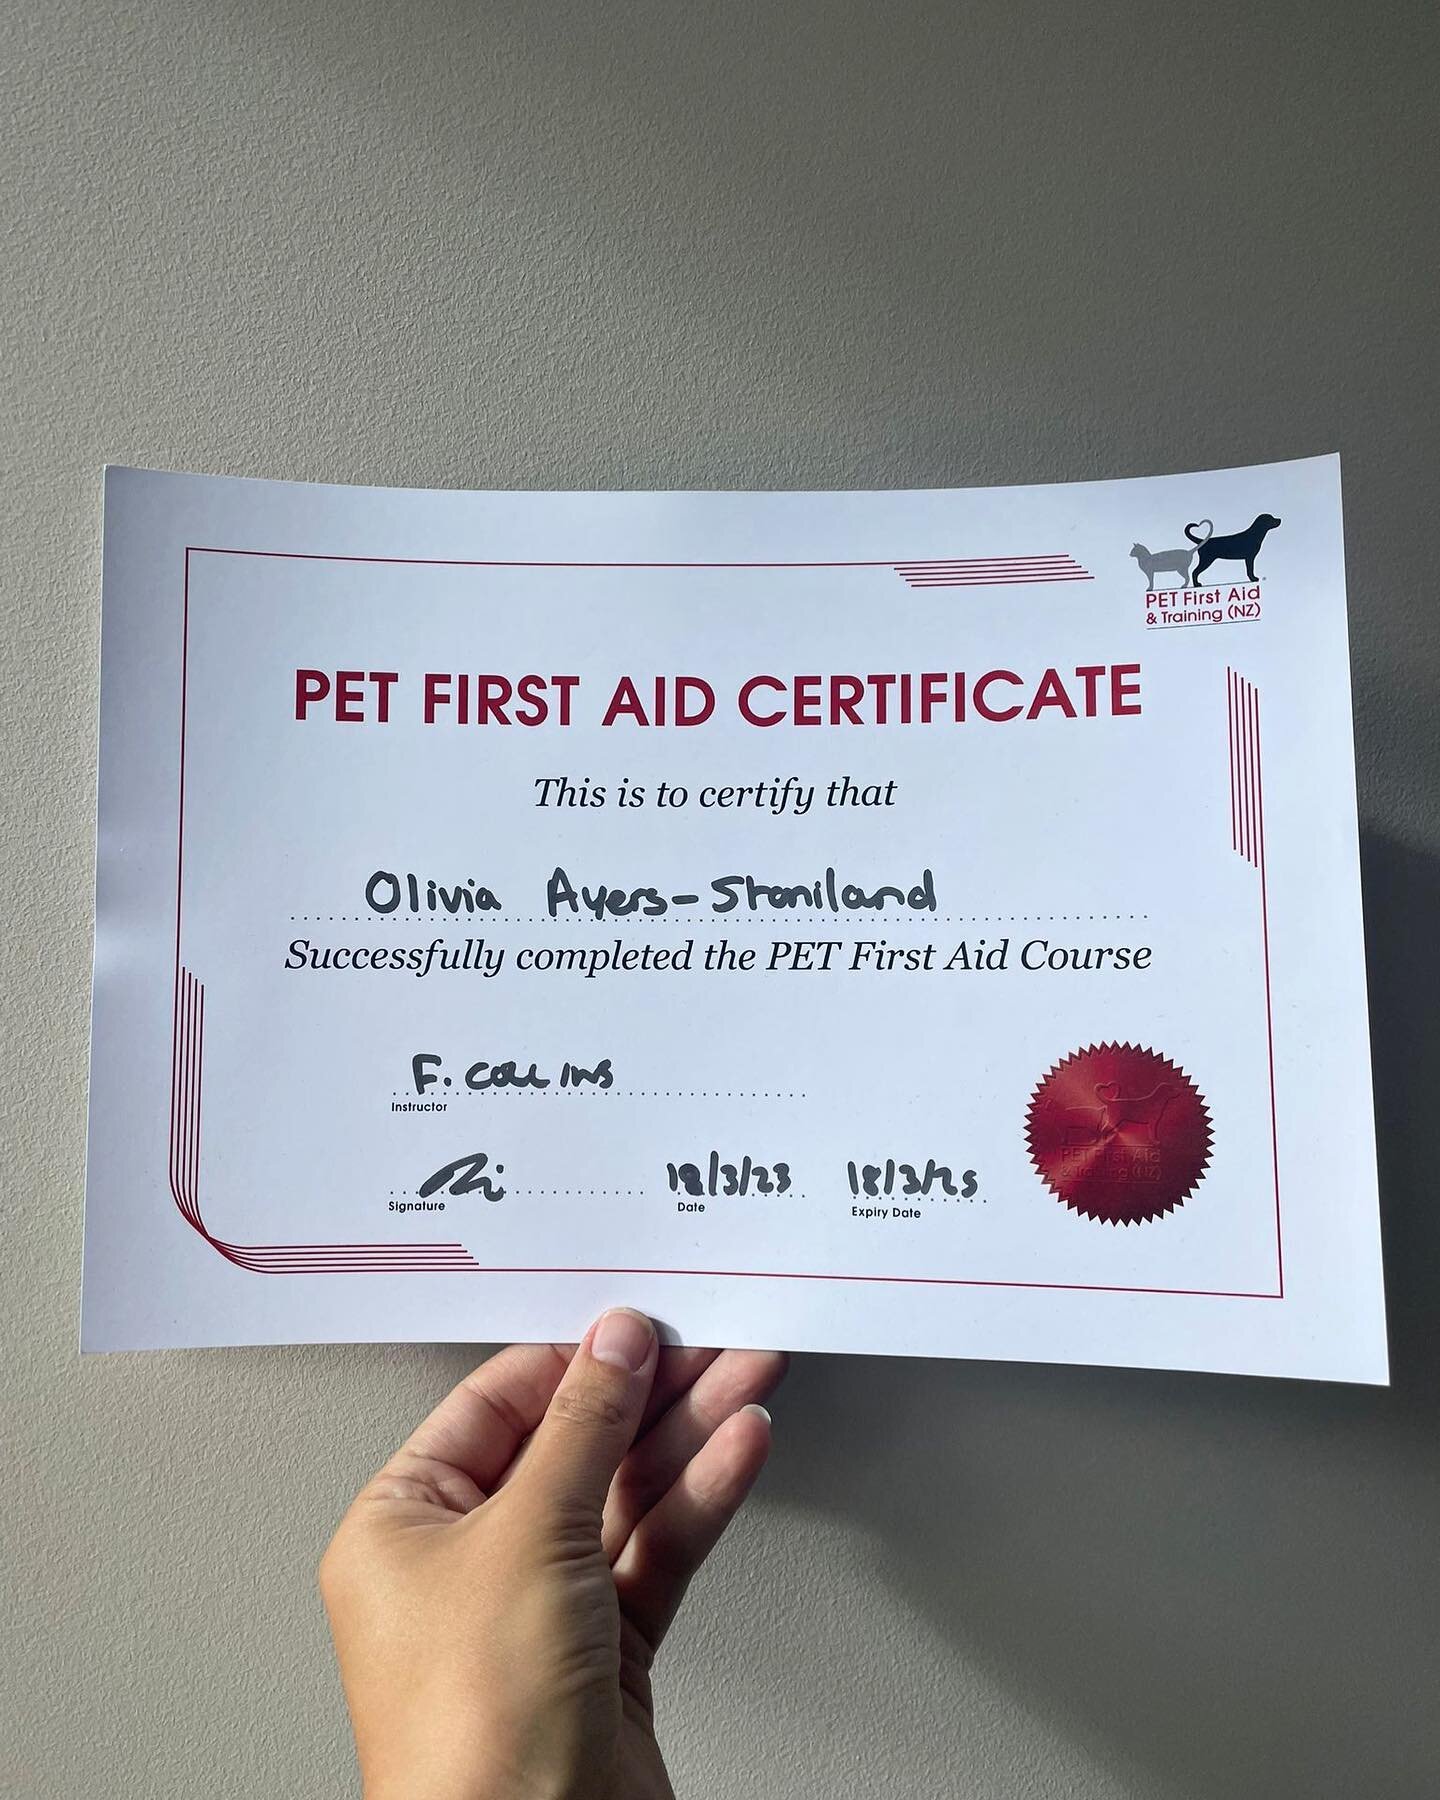 We have lots of exciting news here at Take the Lead QT&hellip;

Olivia is now first aid trained! 

Big thanks to @remarkabledogs &amp; @petfirstaidnz for giving us both this crucial knowledge on how best to care for everyone&rsquo;s beloved pets. 

O